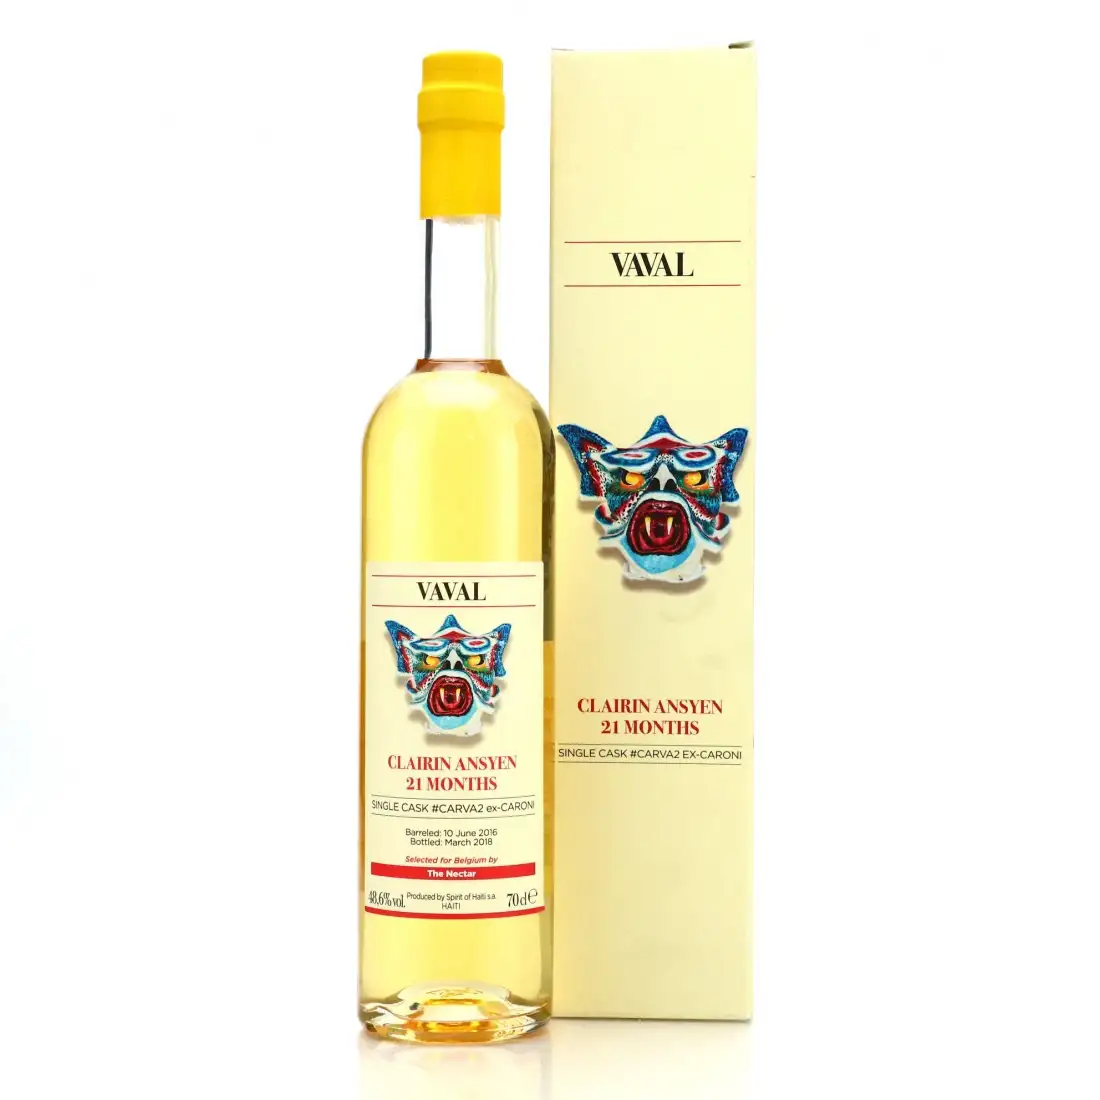 Image of the front of the bottle of the rum Clairin Ansyen Vaval (The Nectar)